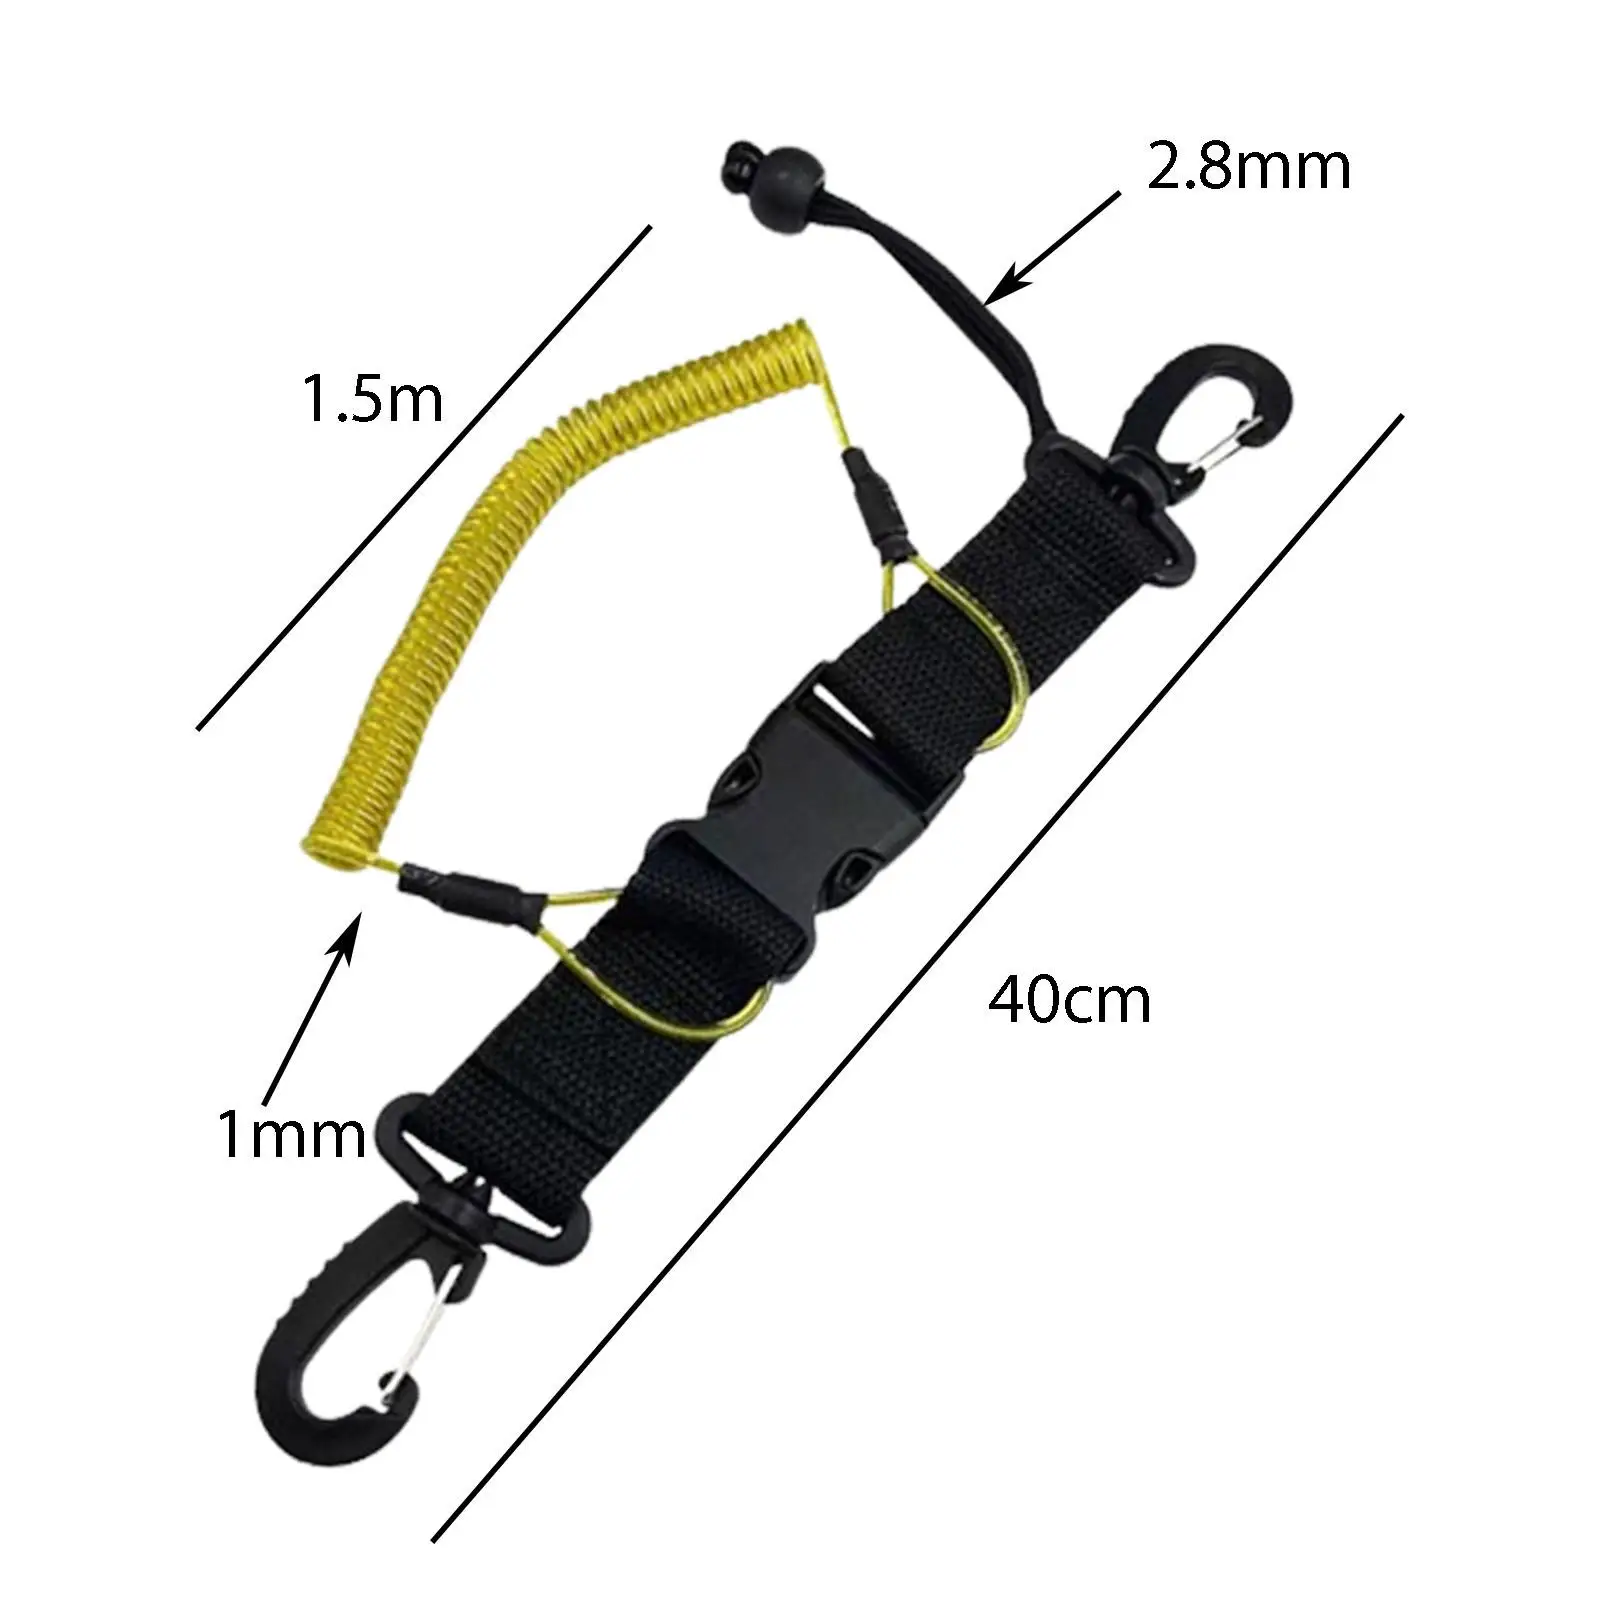 Diving Lanyard Anti Lost Portable Lightweight Freediving Lanyard Rope for Diving Snorkeling Underwater Under Water Sports Lights